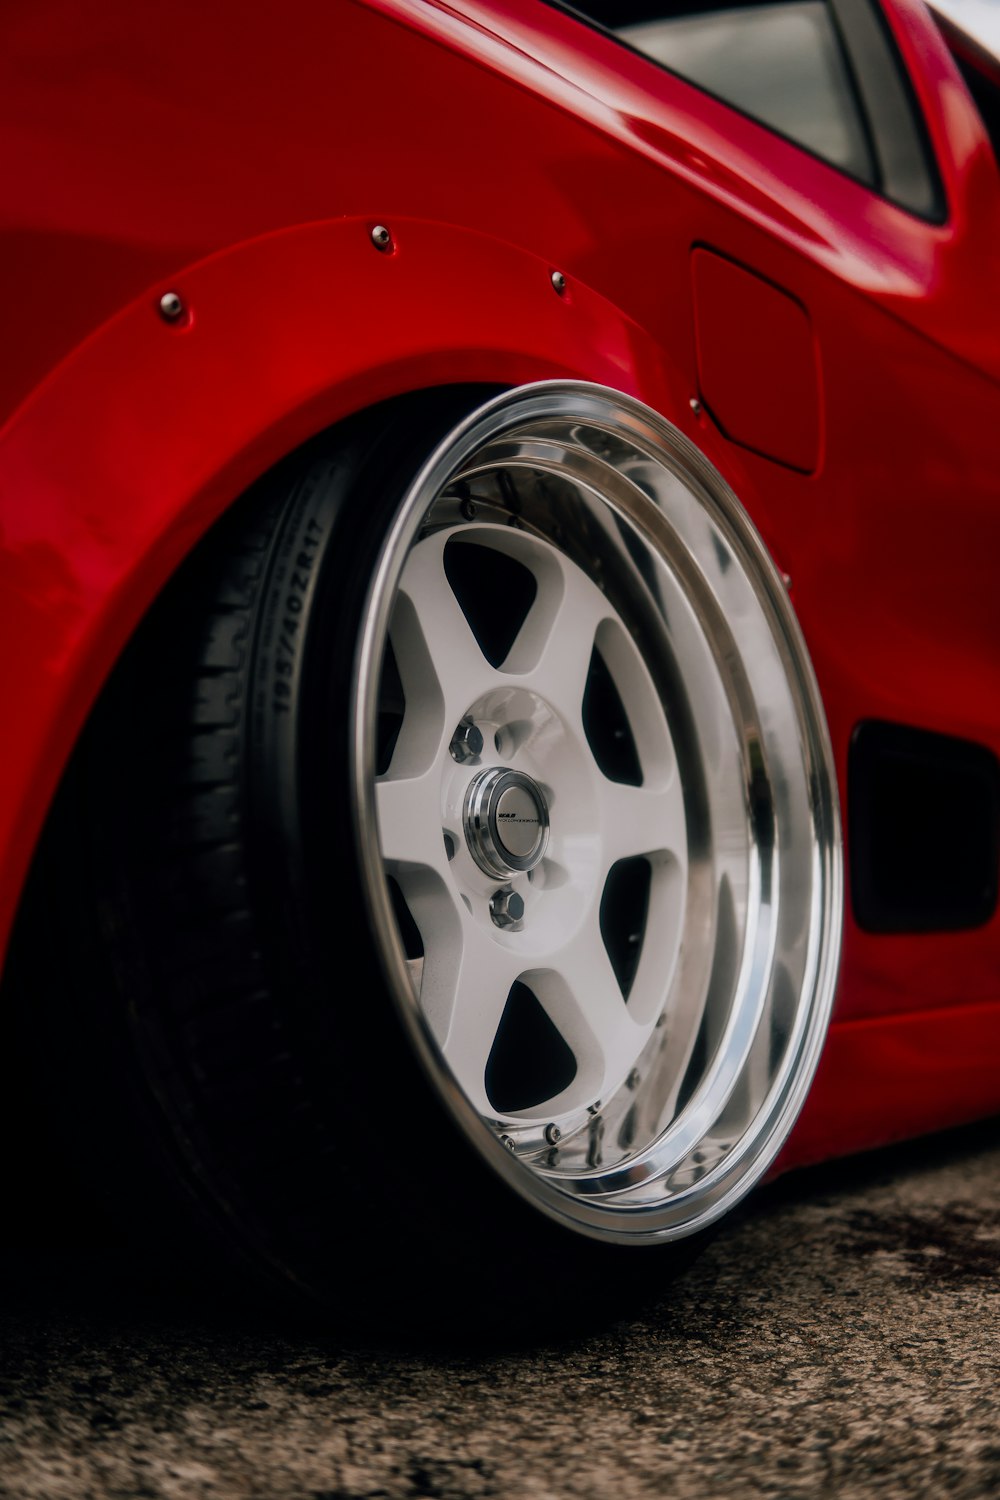 a close up of a red sports car wheel